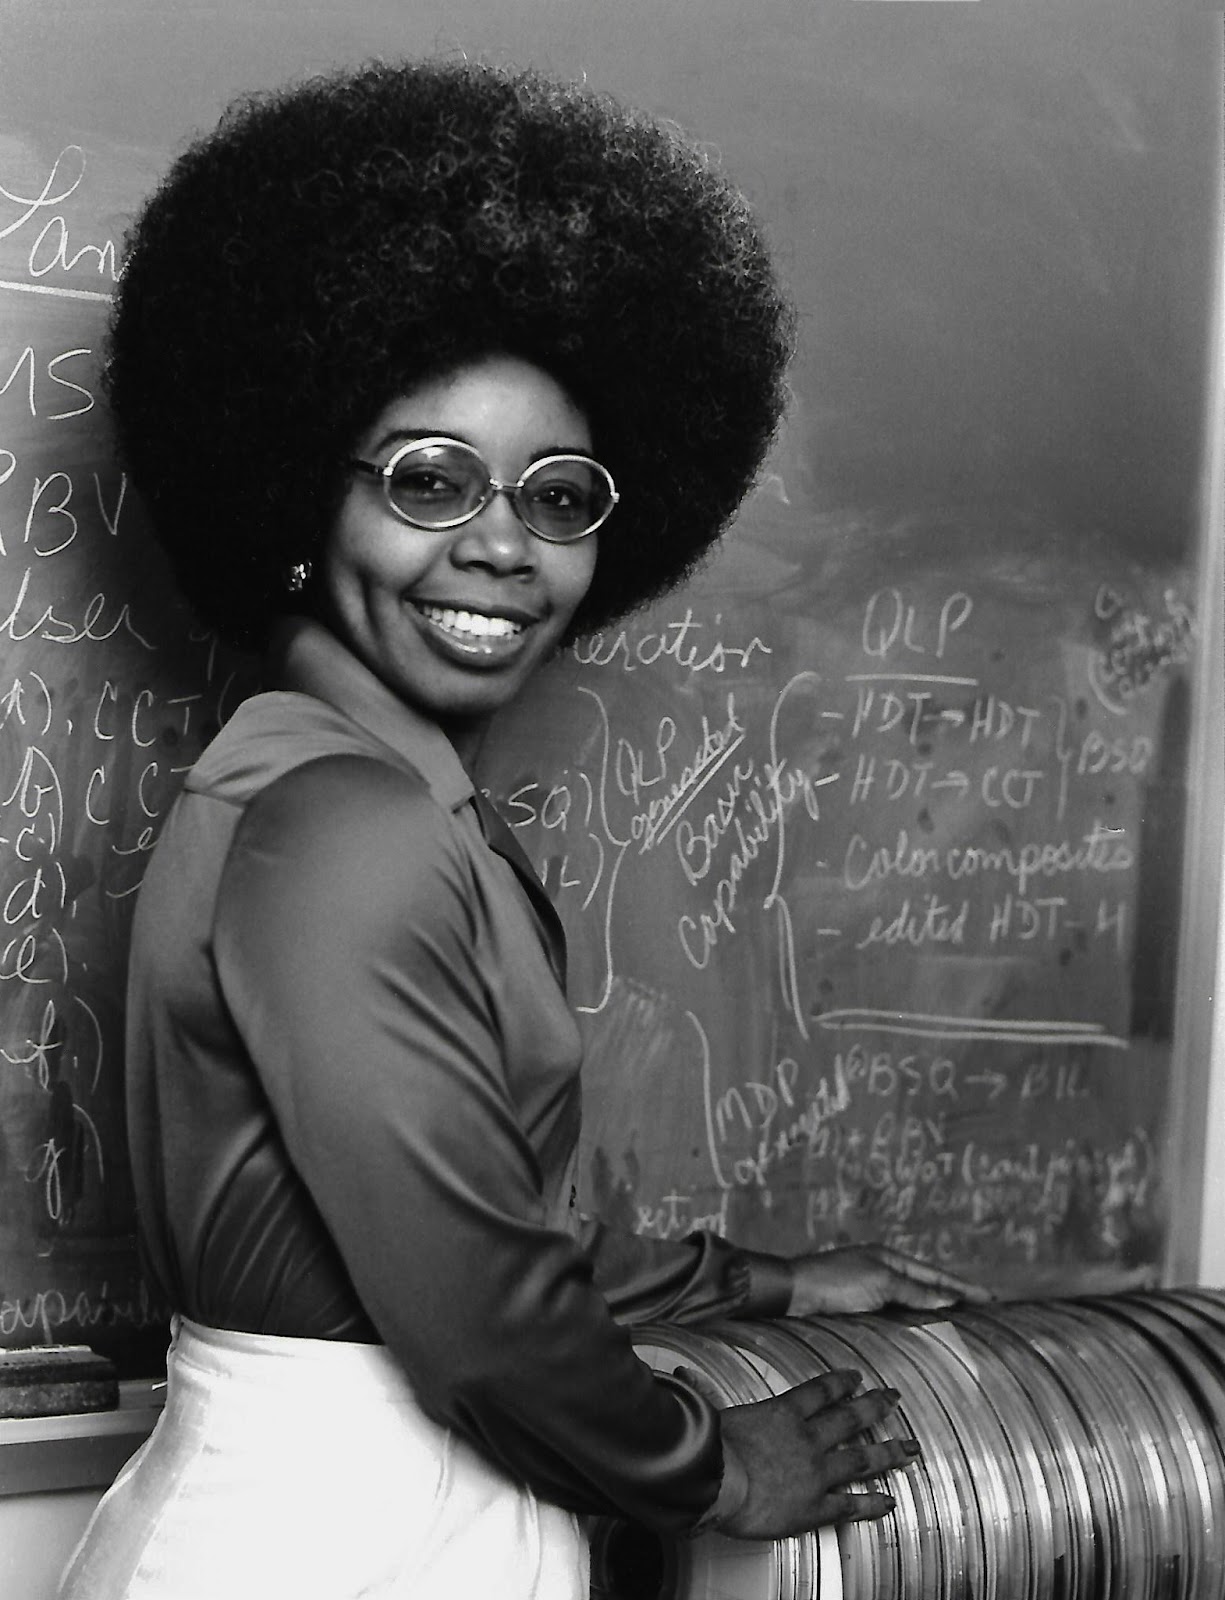 Black and white photo of Valerie Thomas posing in front of a chalkboard covered in notes and calculations. Thomas is styling an afro with round tinted glasses, a dark-colored blouse and white bottoms.